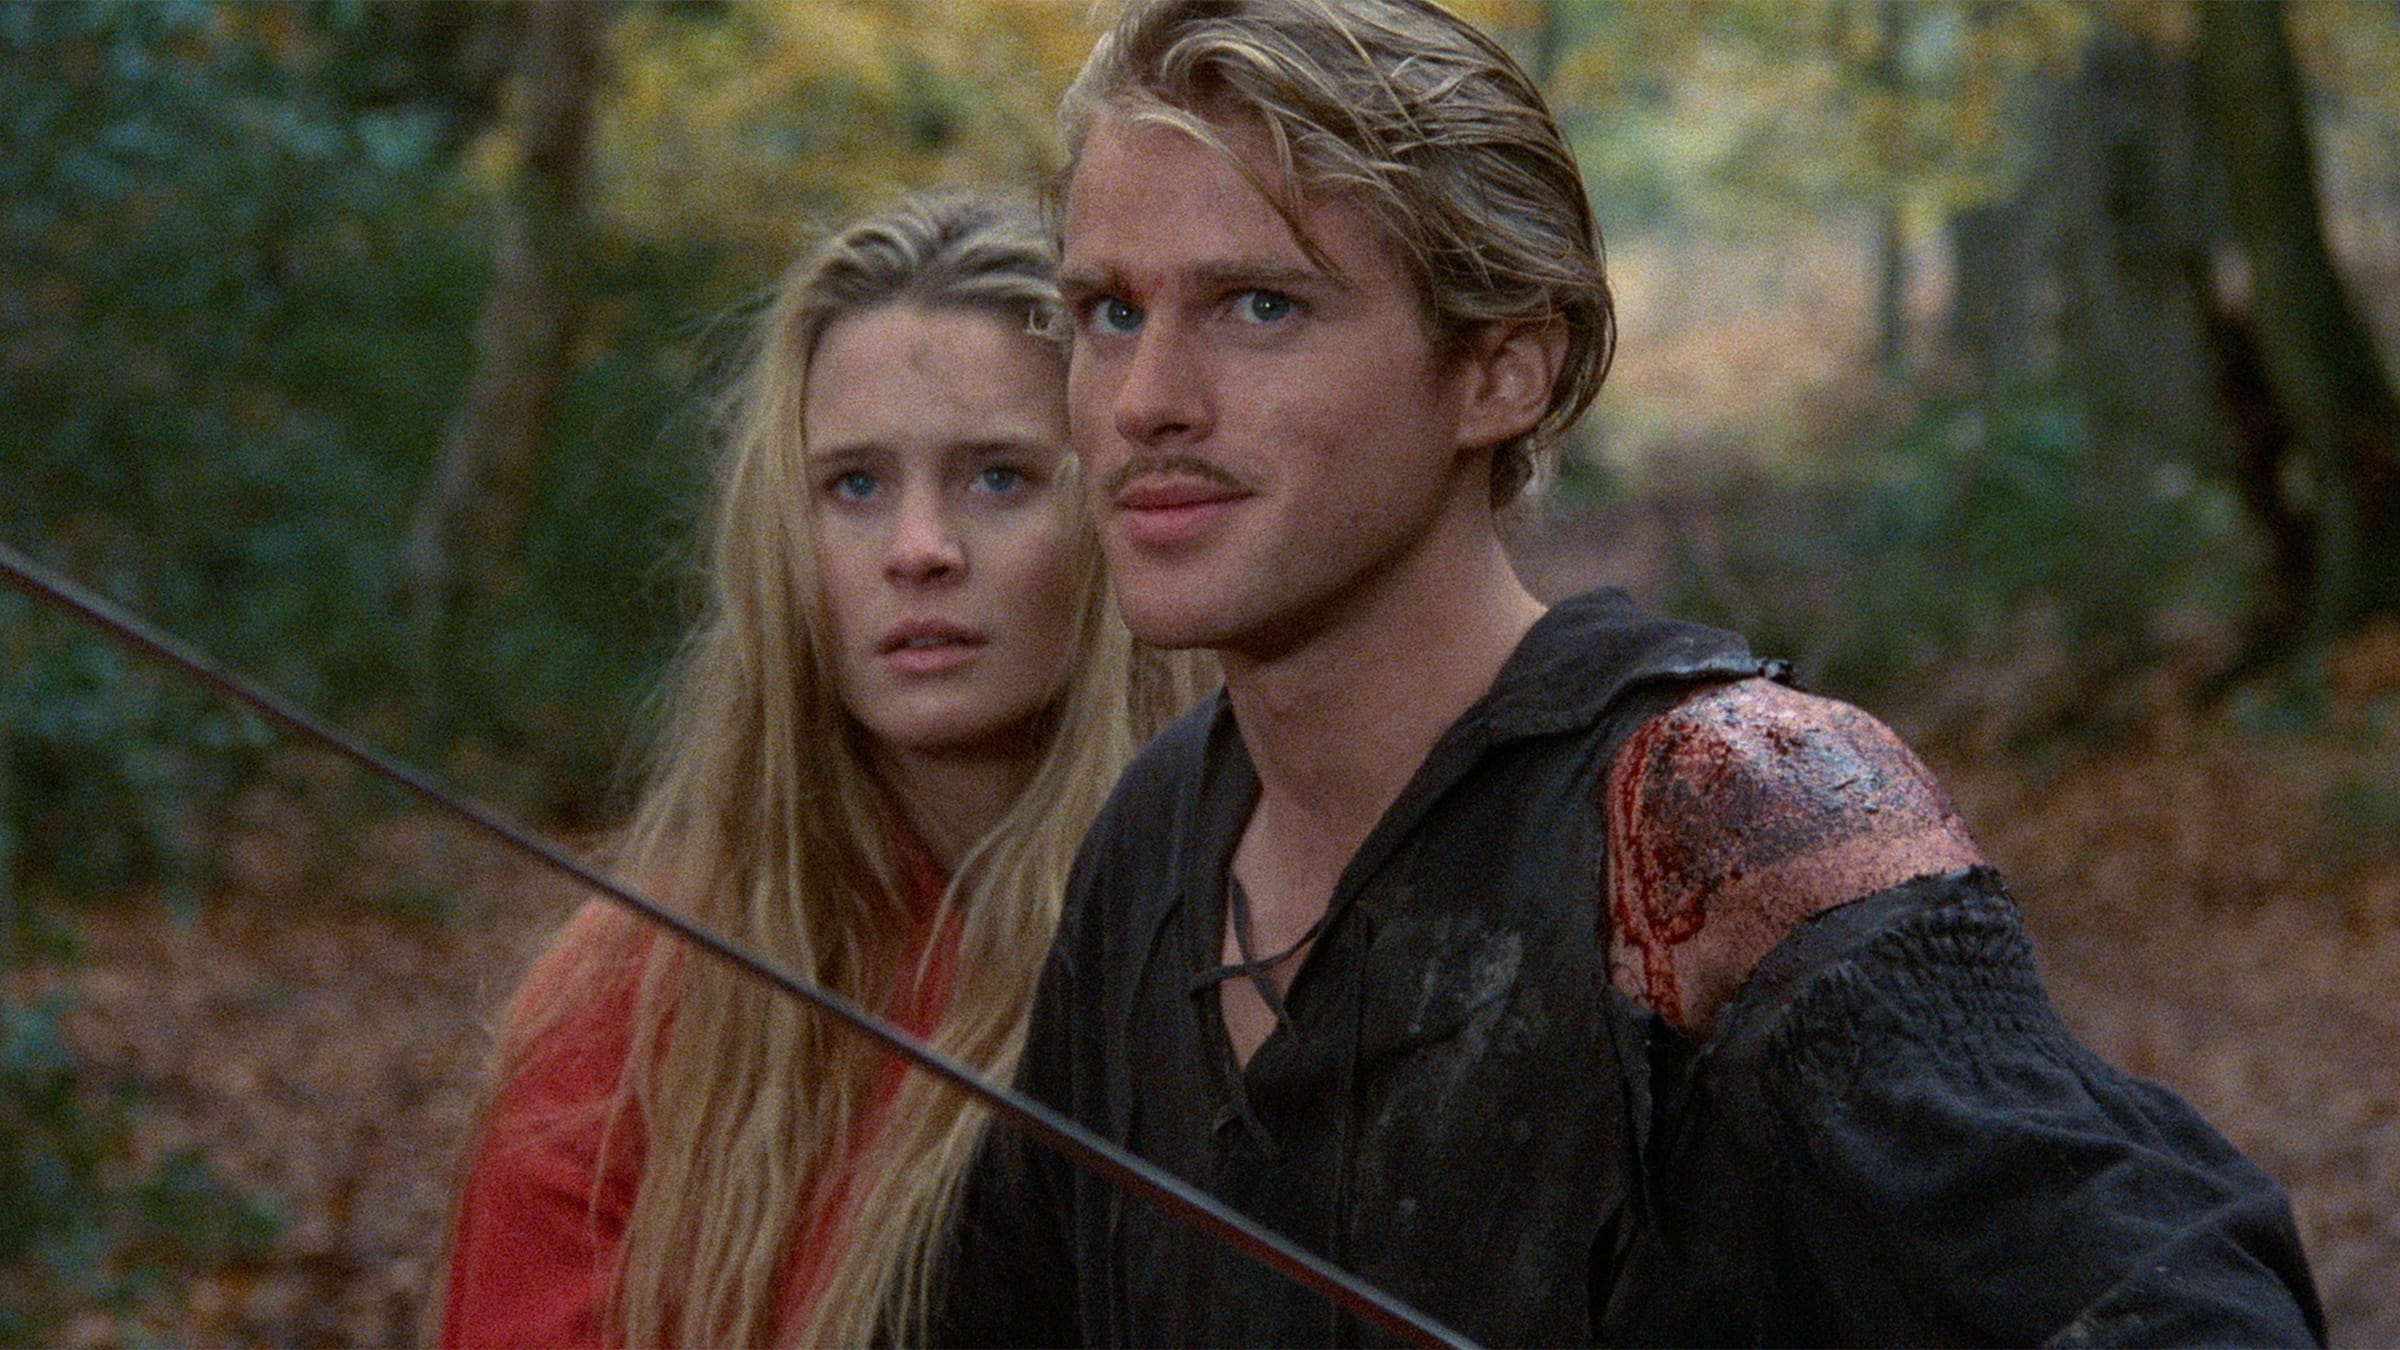 L-R: Robin Wright and Cary Elwes in The Princess Bride.